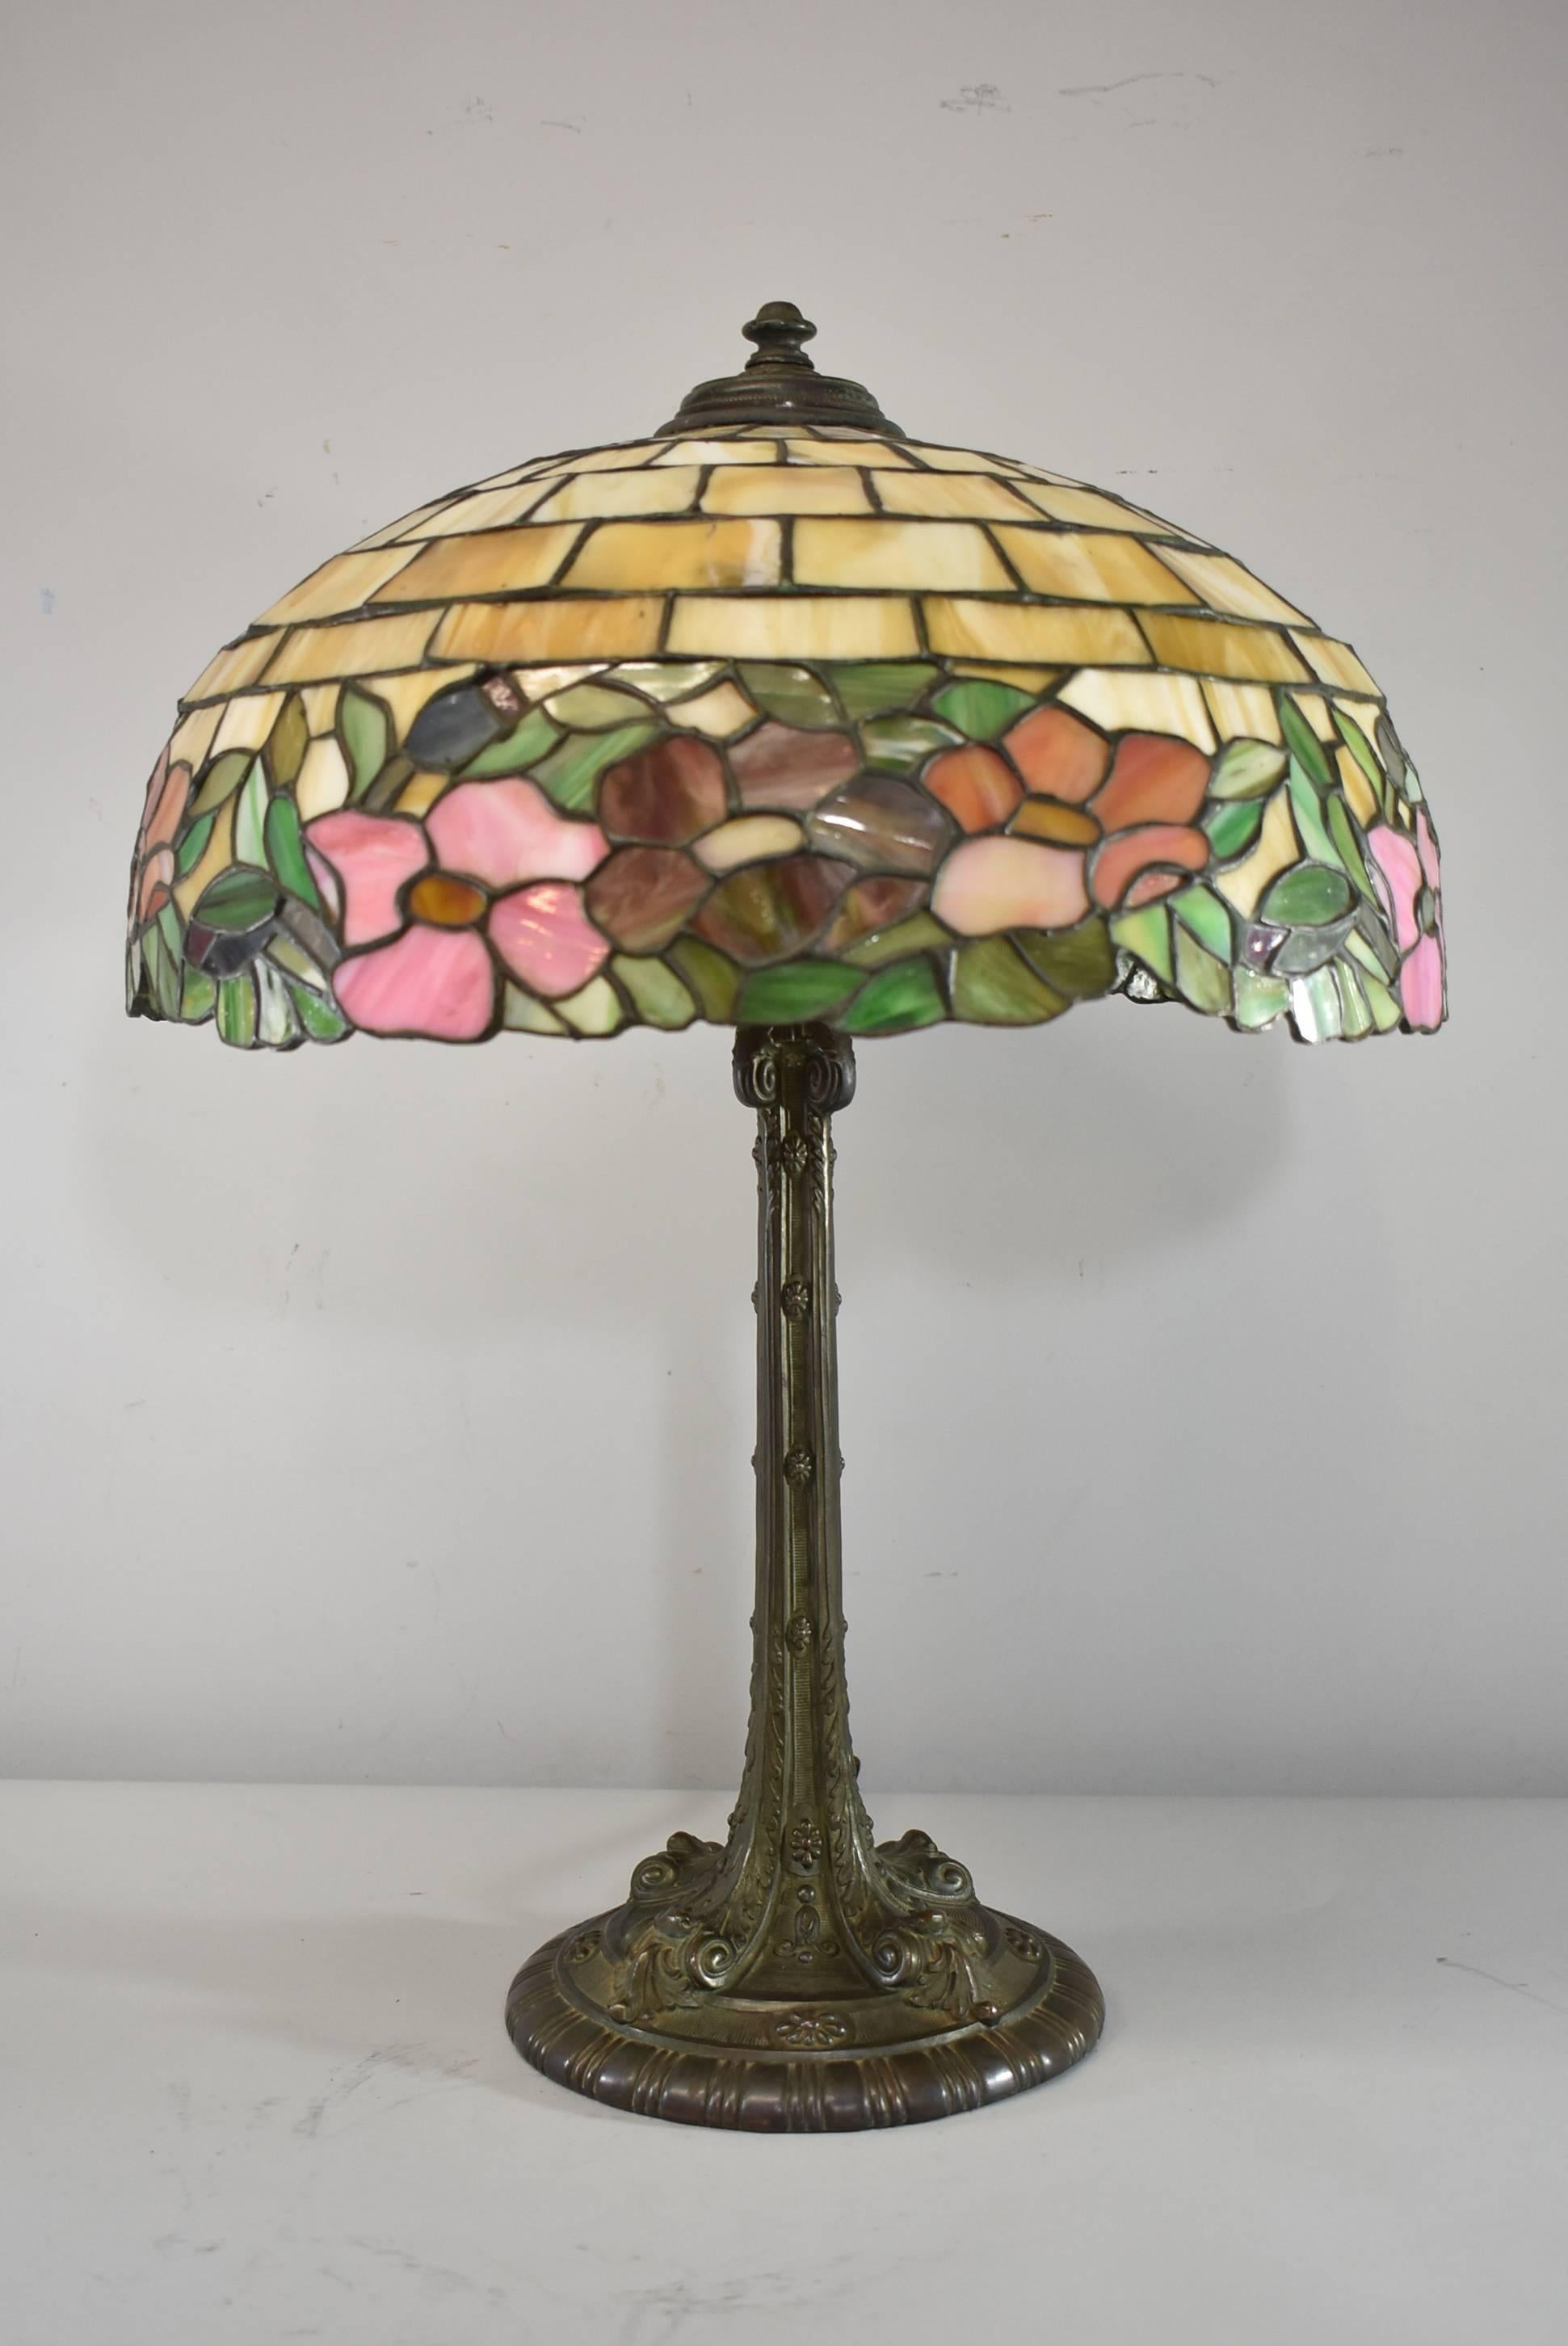 A stunning leaded slag glass table lamp by Wilkinson. This beautiful lamp features blooming and budding peonies flowers. Good wiring with a new cloth cord. The base has a great patina. The dimensions are 25